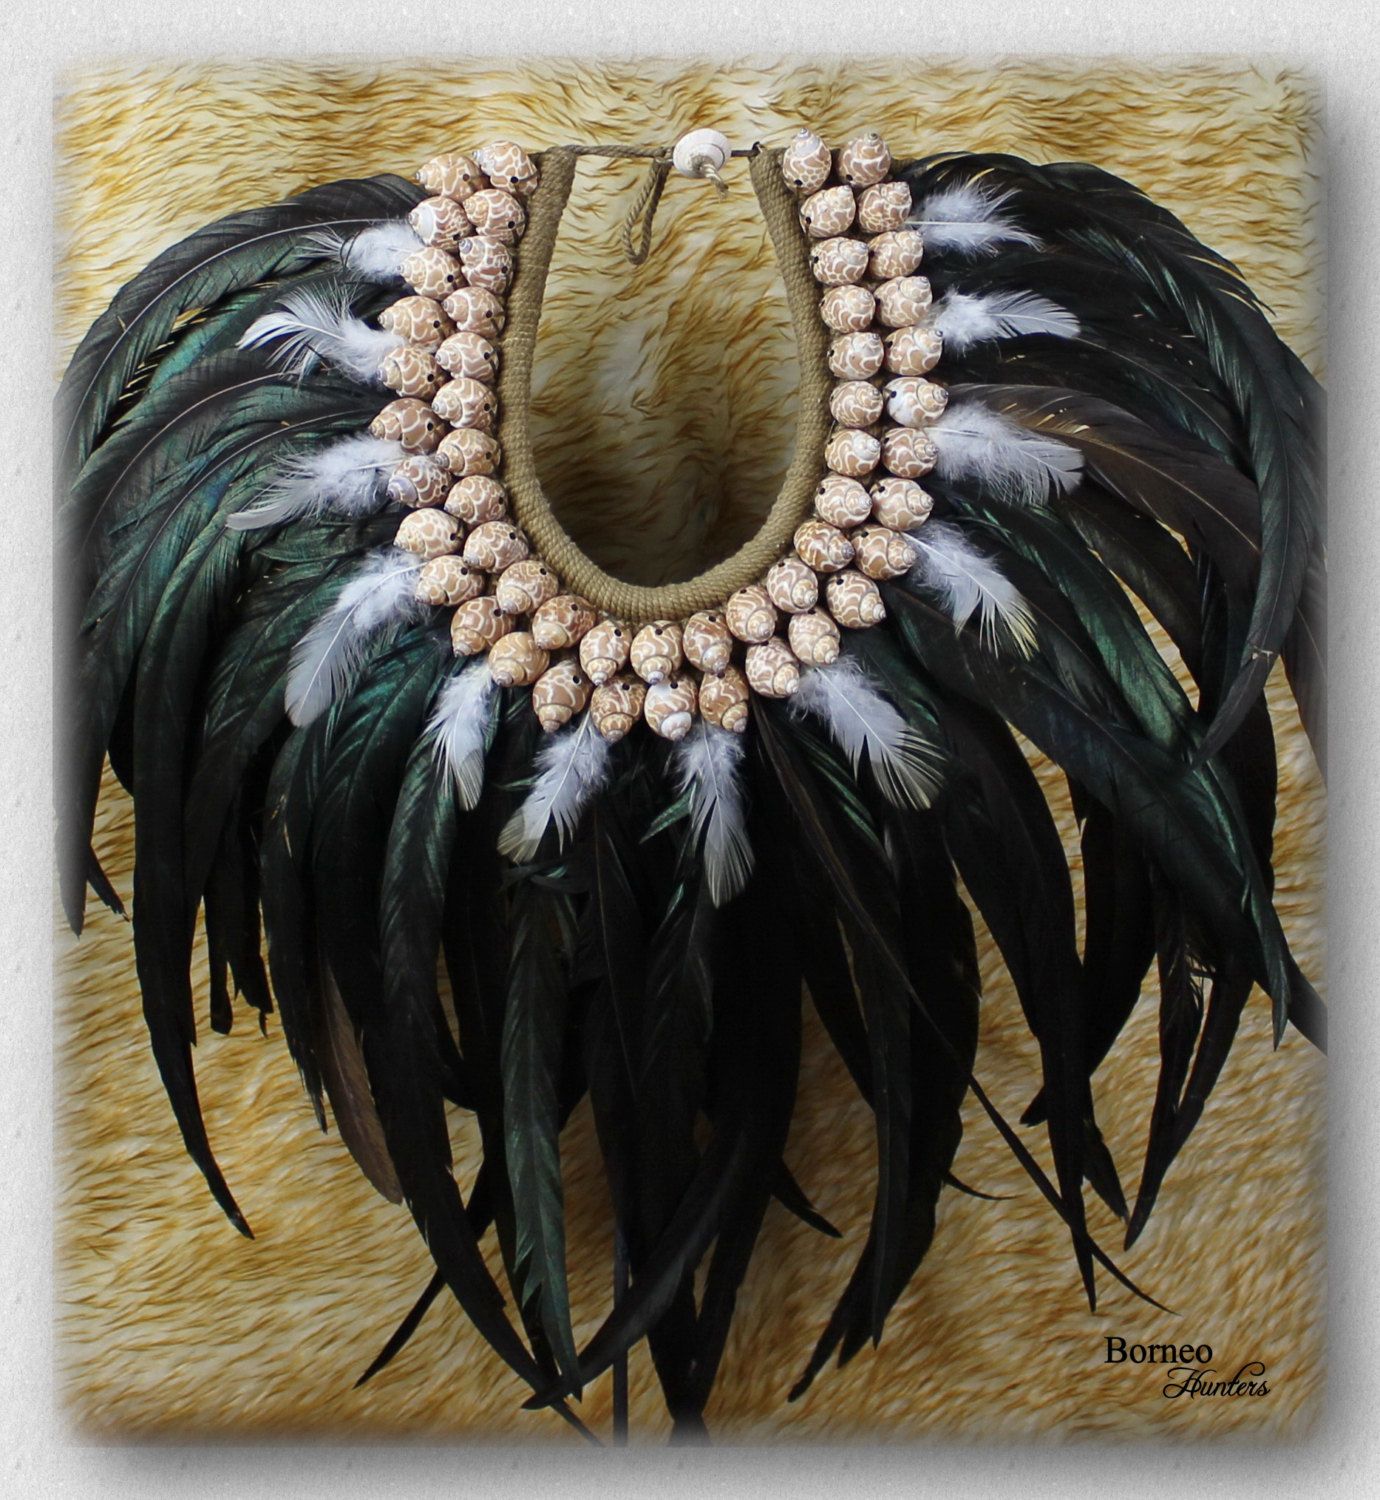 Iridescent Feathers And Shells Necklace.Tribal New Guinea Braided ...